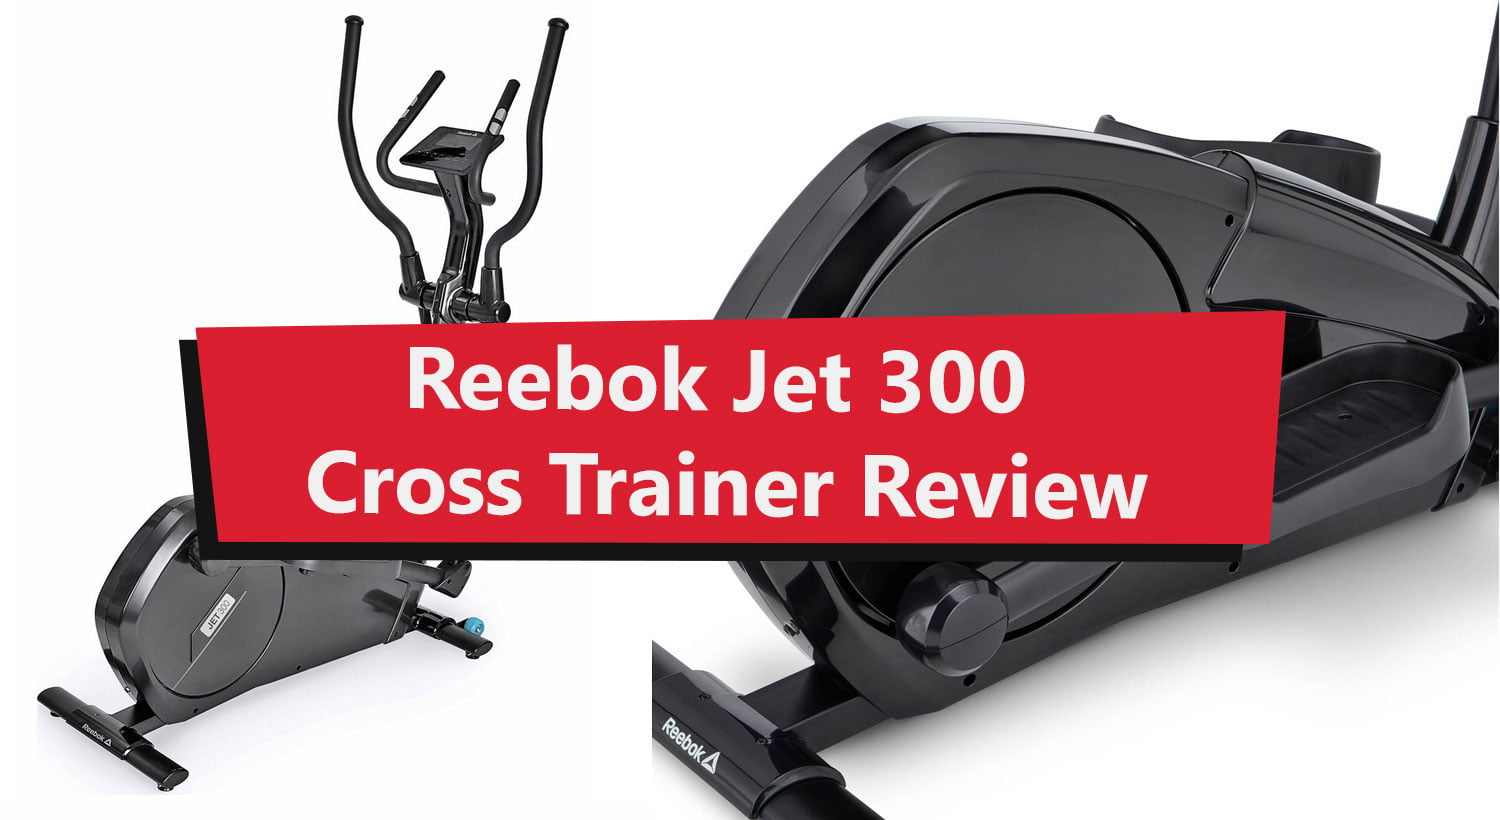 Reebok Jet 300 Trainer Review: Is it worth the price tag? - Gym Tech Review - Reviews of Latest Gym Equipment